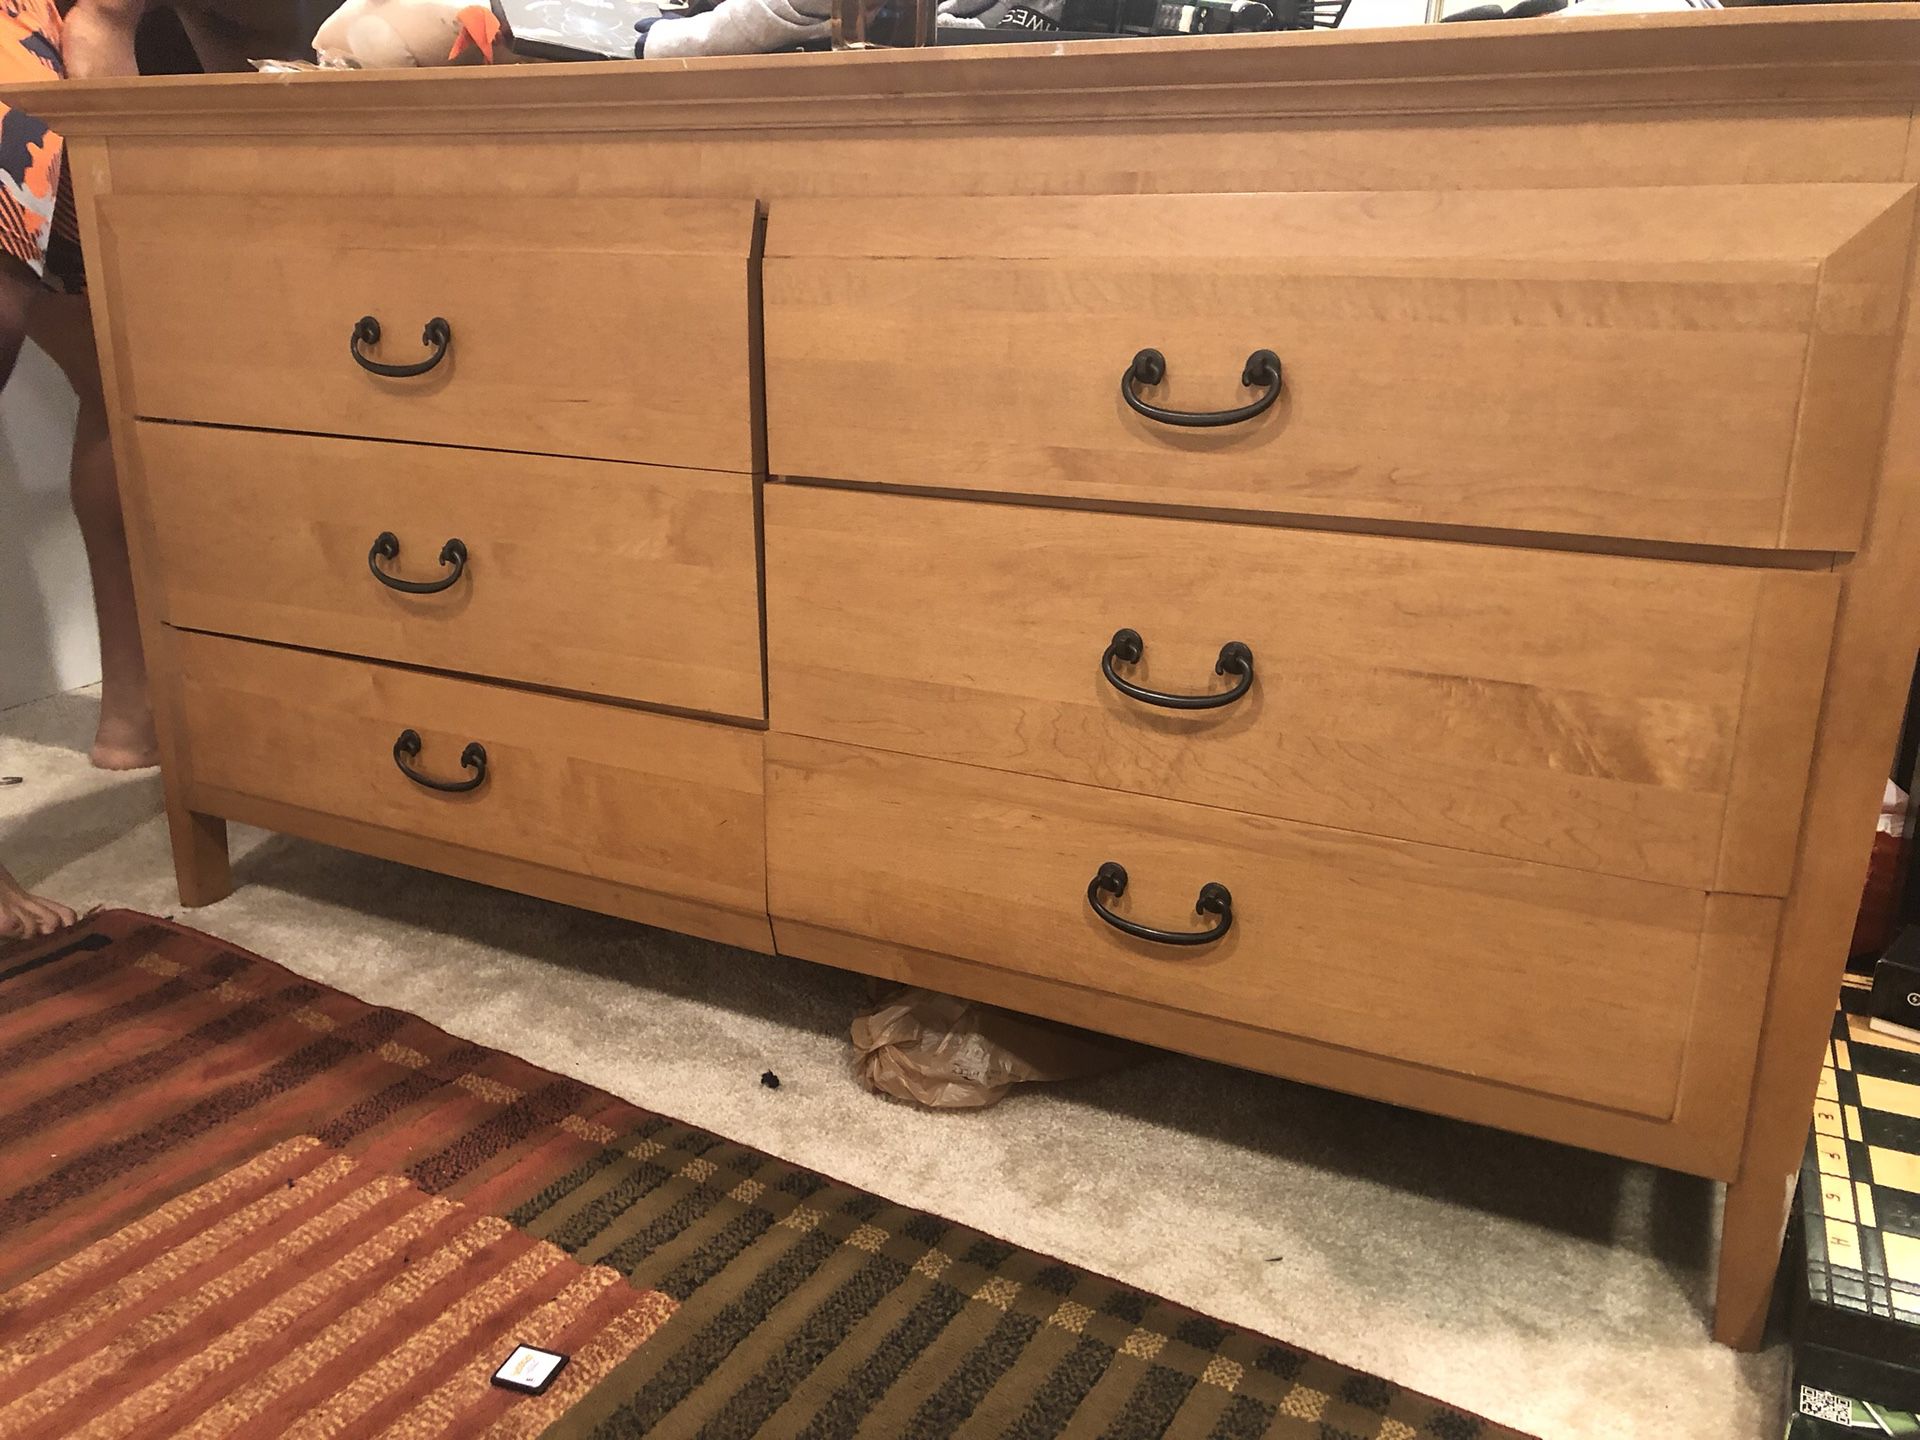 Queen size bed and drawers